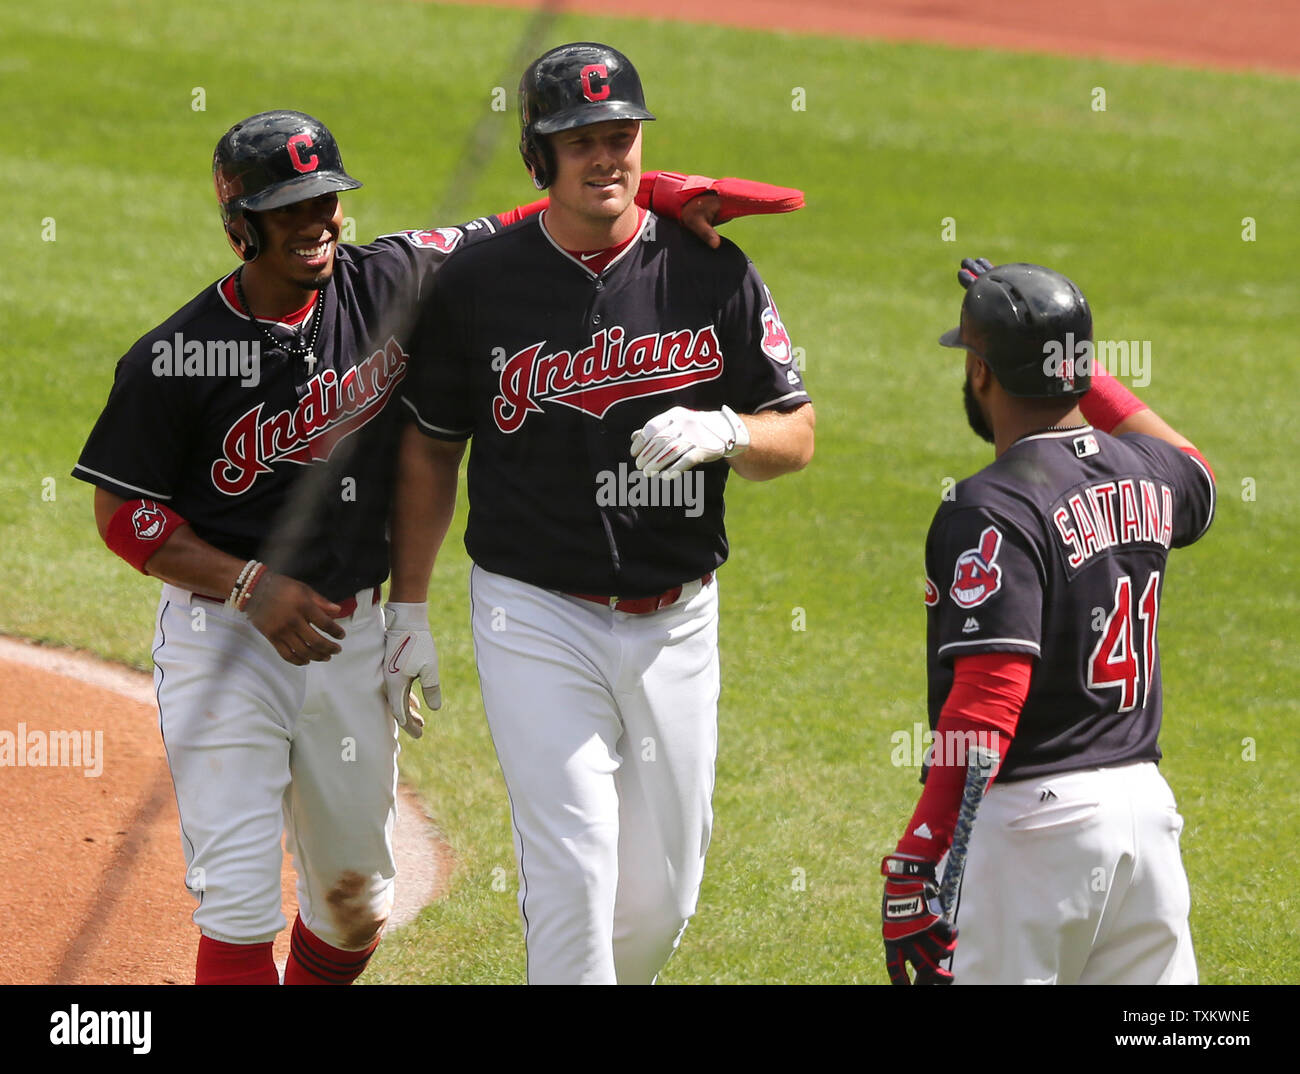 Cleveland Indians Jay Bruce (M) is congratulated by Francisco Lindor (L) and Carlos Santana (R) after hitting a three run home run in the first inning of a game against the Detroit Tigers at Progressive Field in Cleveland, Ohio on September 13, 2017. Photo by Aaron Josefczyk/UPI Stock Photo